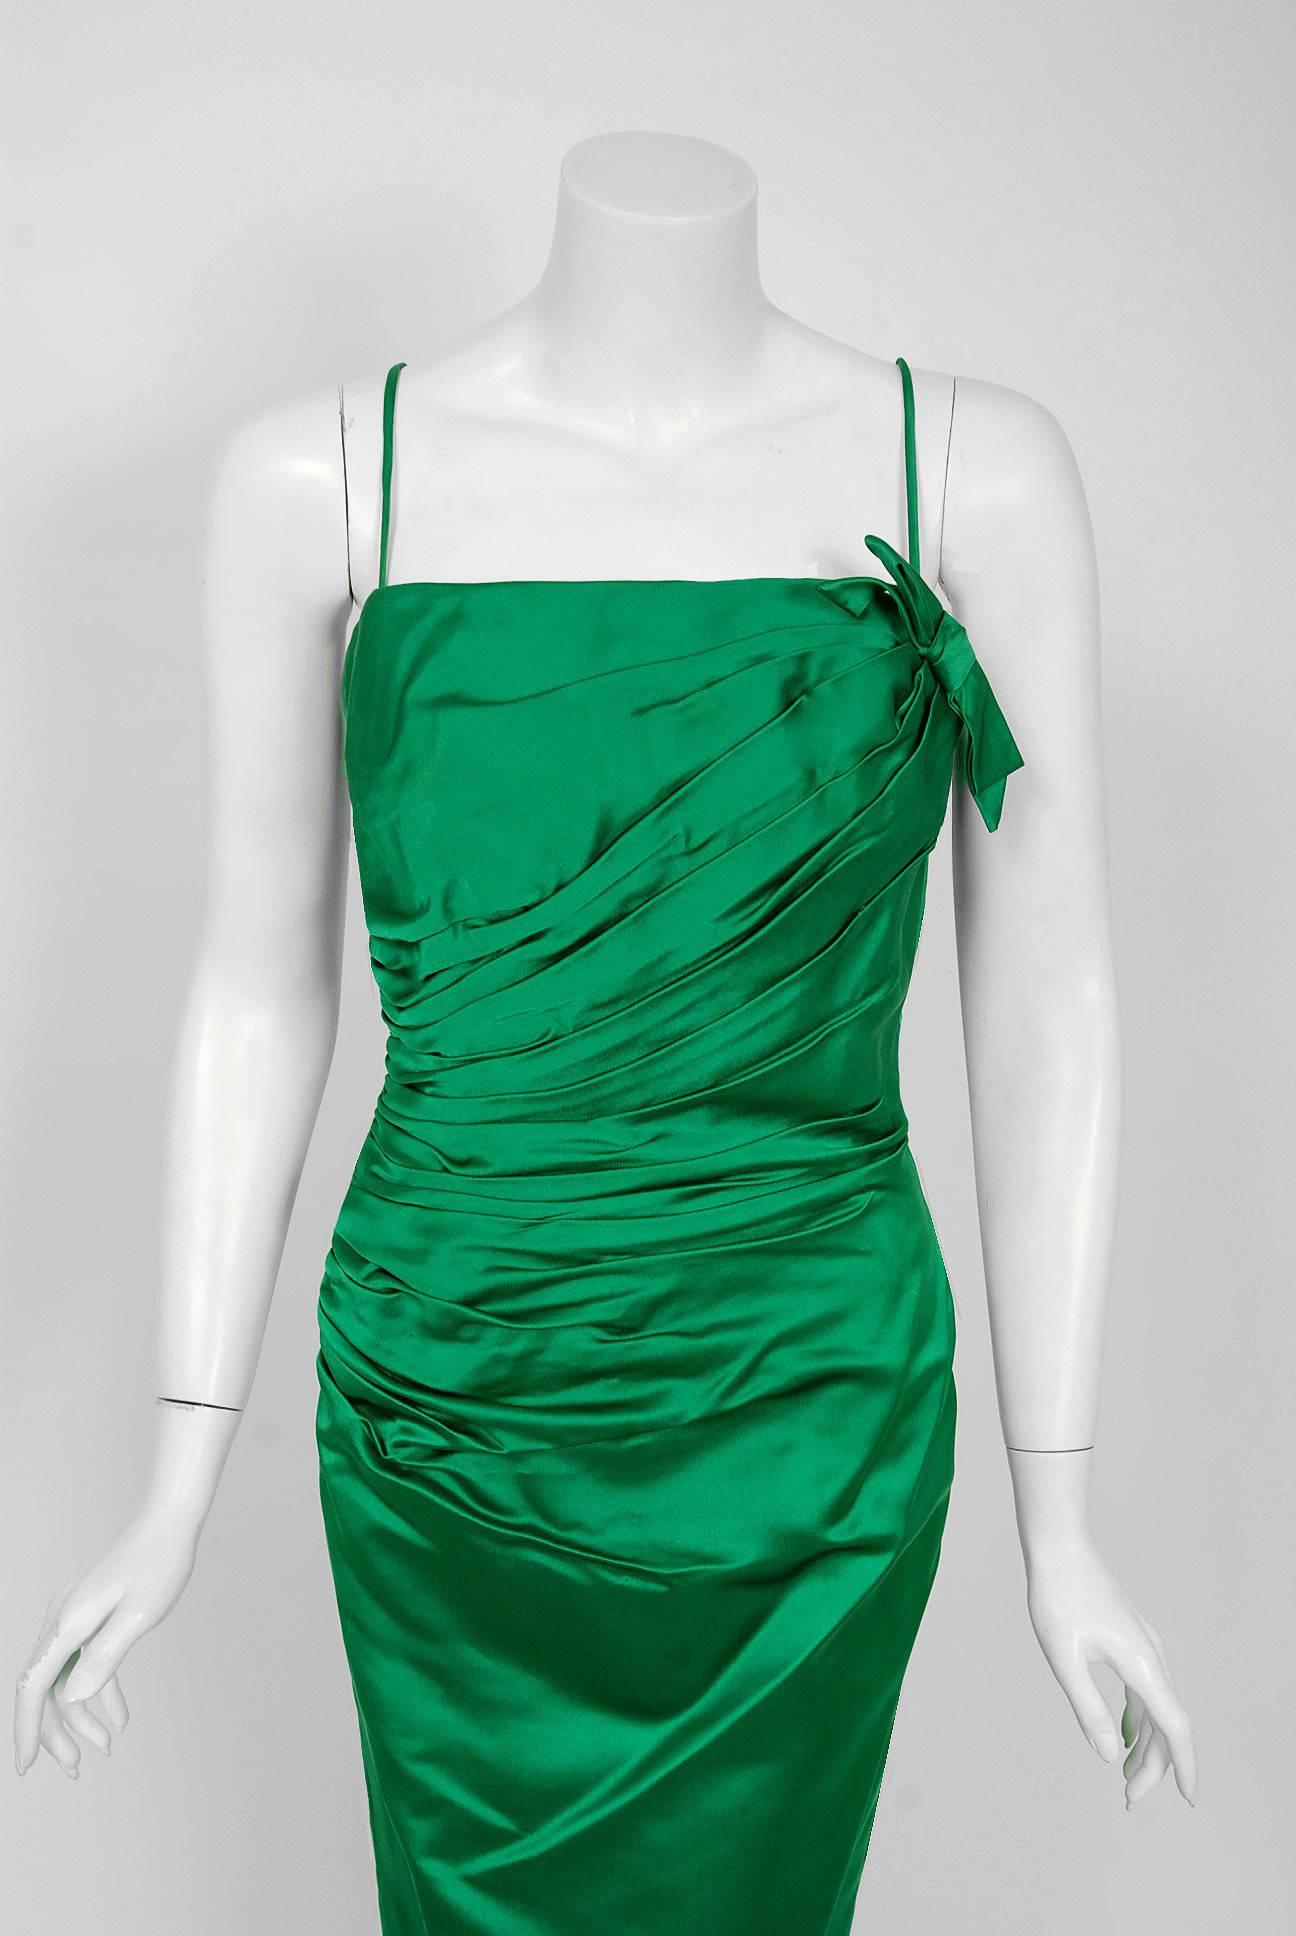 This is such a seductive and dramatic evening gown from the rare Philip Hulitar Old Hollywood designer label. Perfect for any upcoming event; you can't help but feel feminine in this beauty! The garment is fashioned from stunning mid-weight emerald